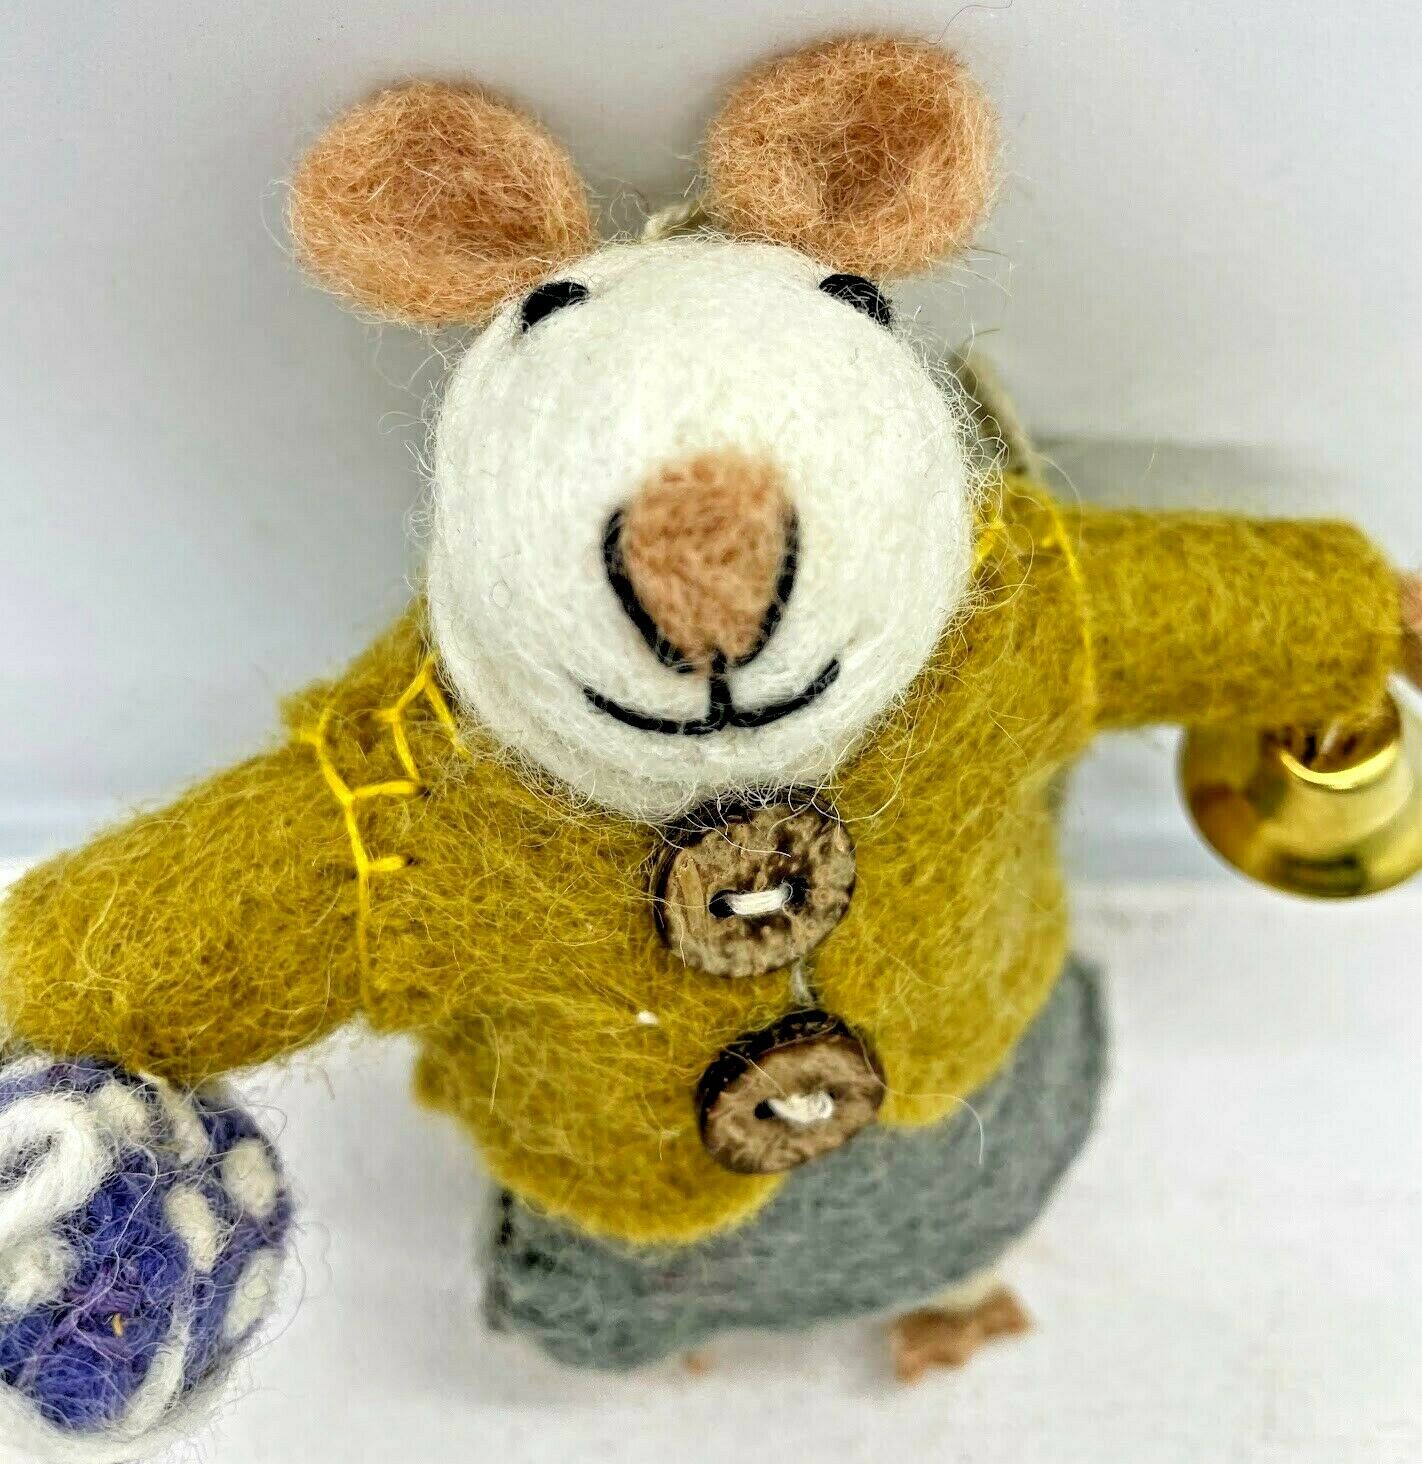 Primitive Folk Art Handmade Felted Wool Agnes Birthday Present Mouse - The Primitive Pineapple Collection